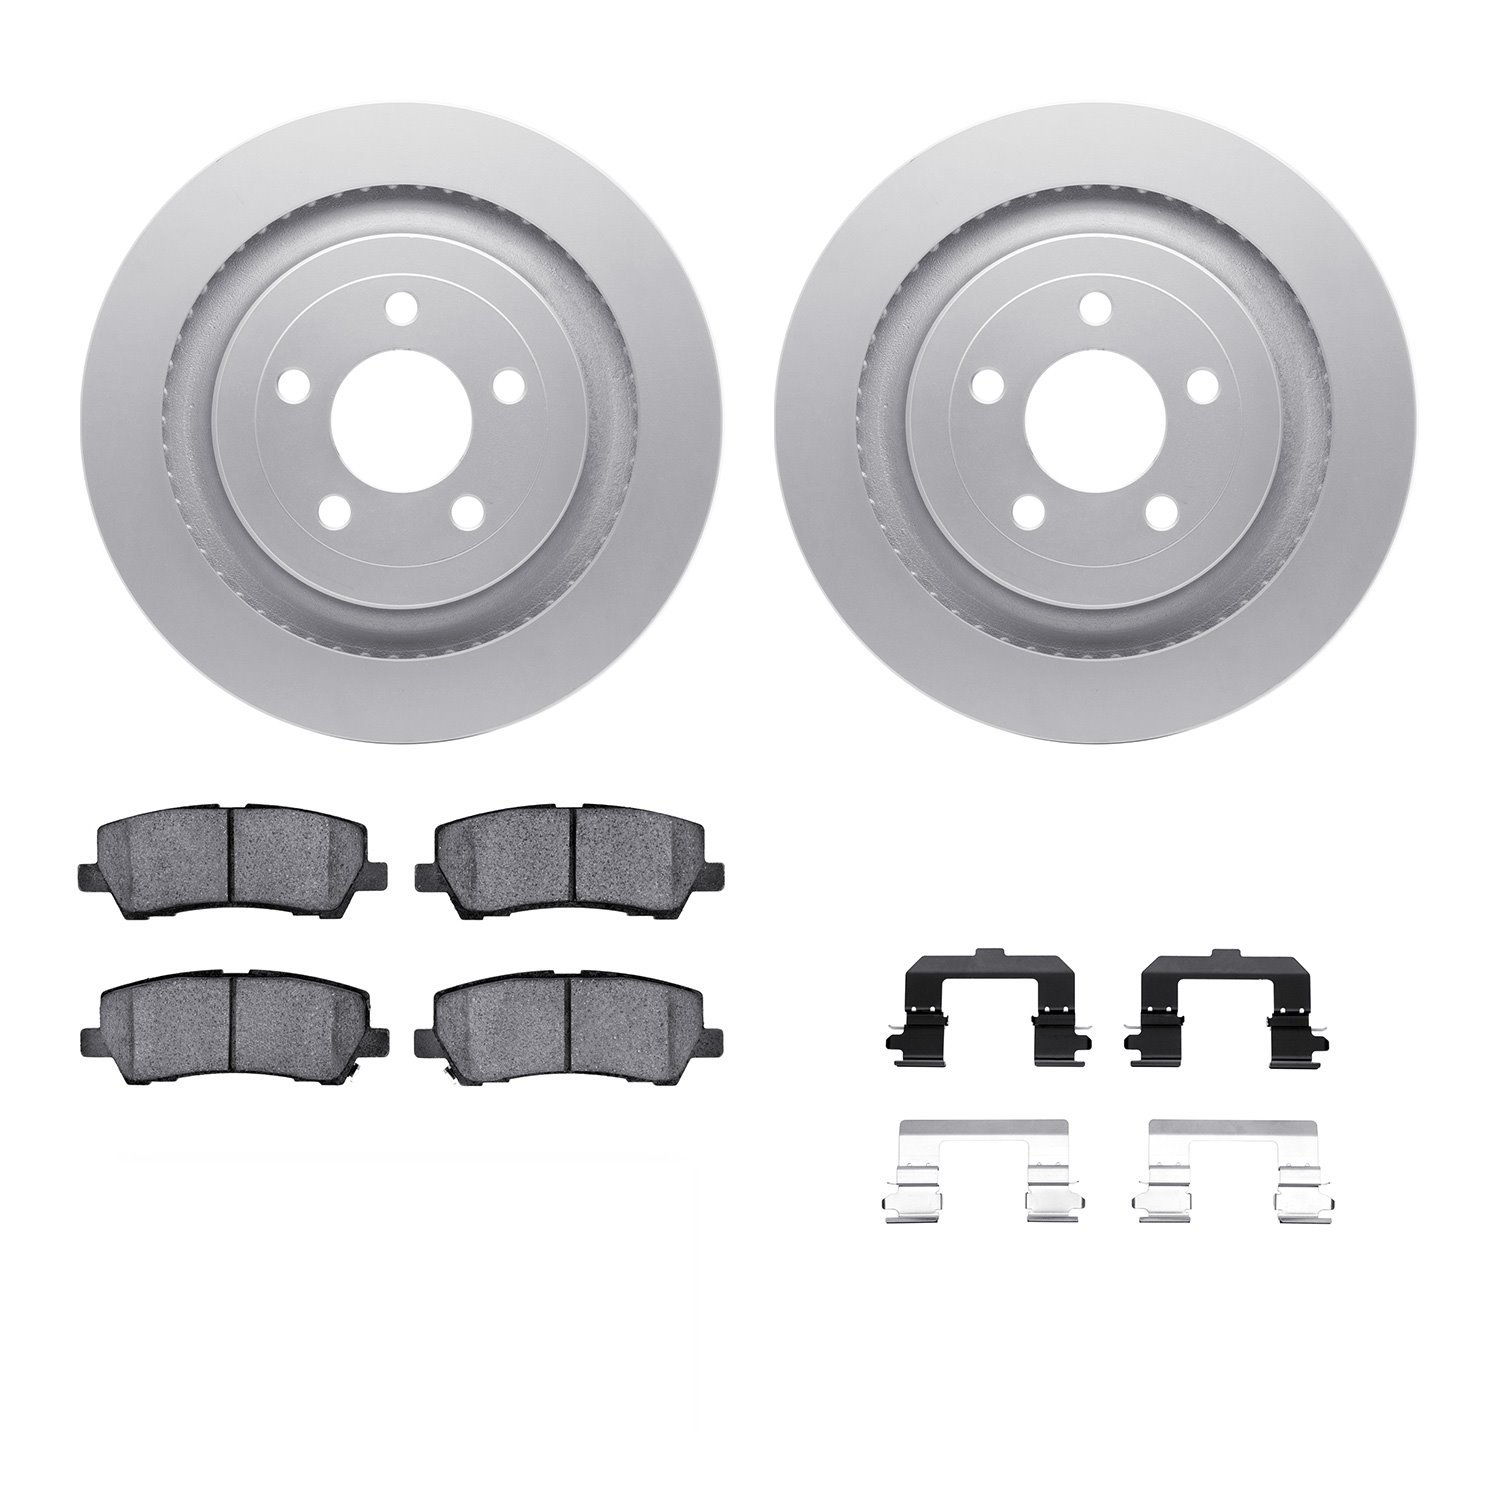 4312-54145 Geospec Brake Rotors with 3000-Series Ceramic Brake Pads & Hardware, Fits Select Ford/Lincoln/Mercury/Mazda, Position